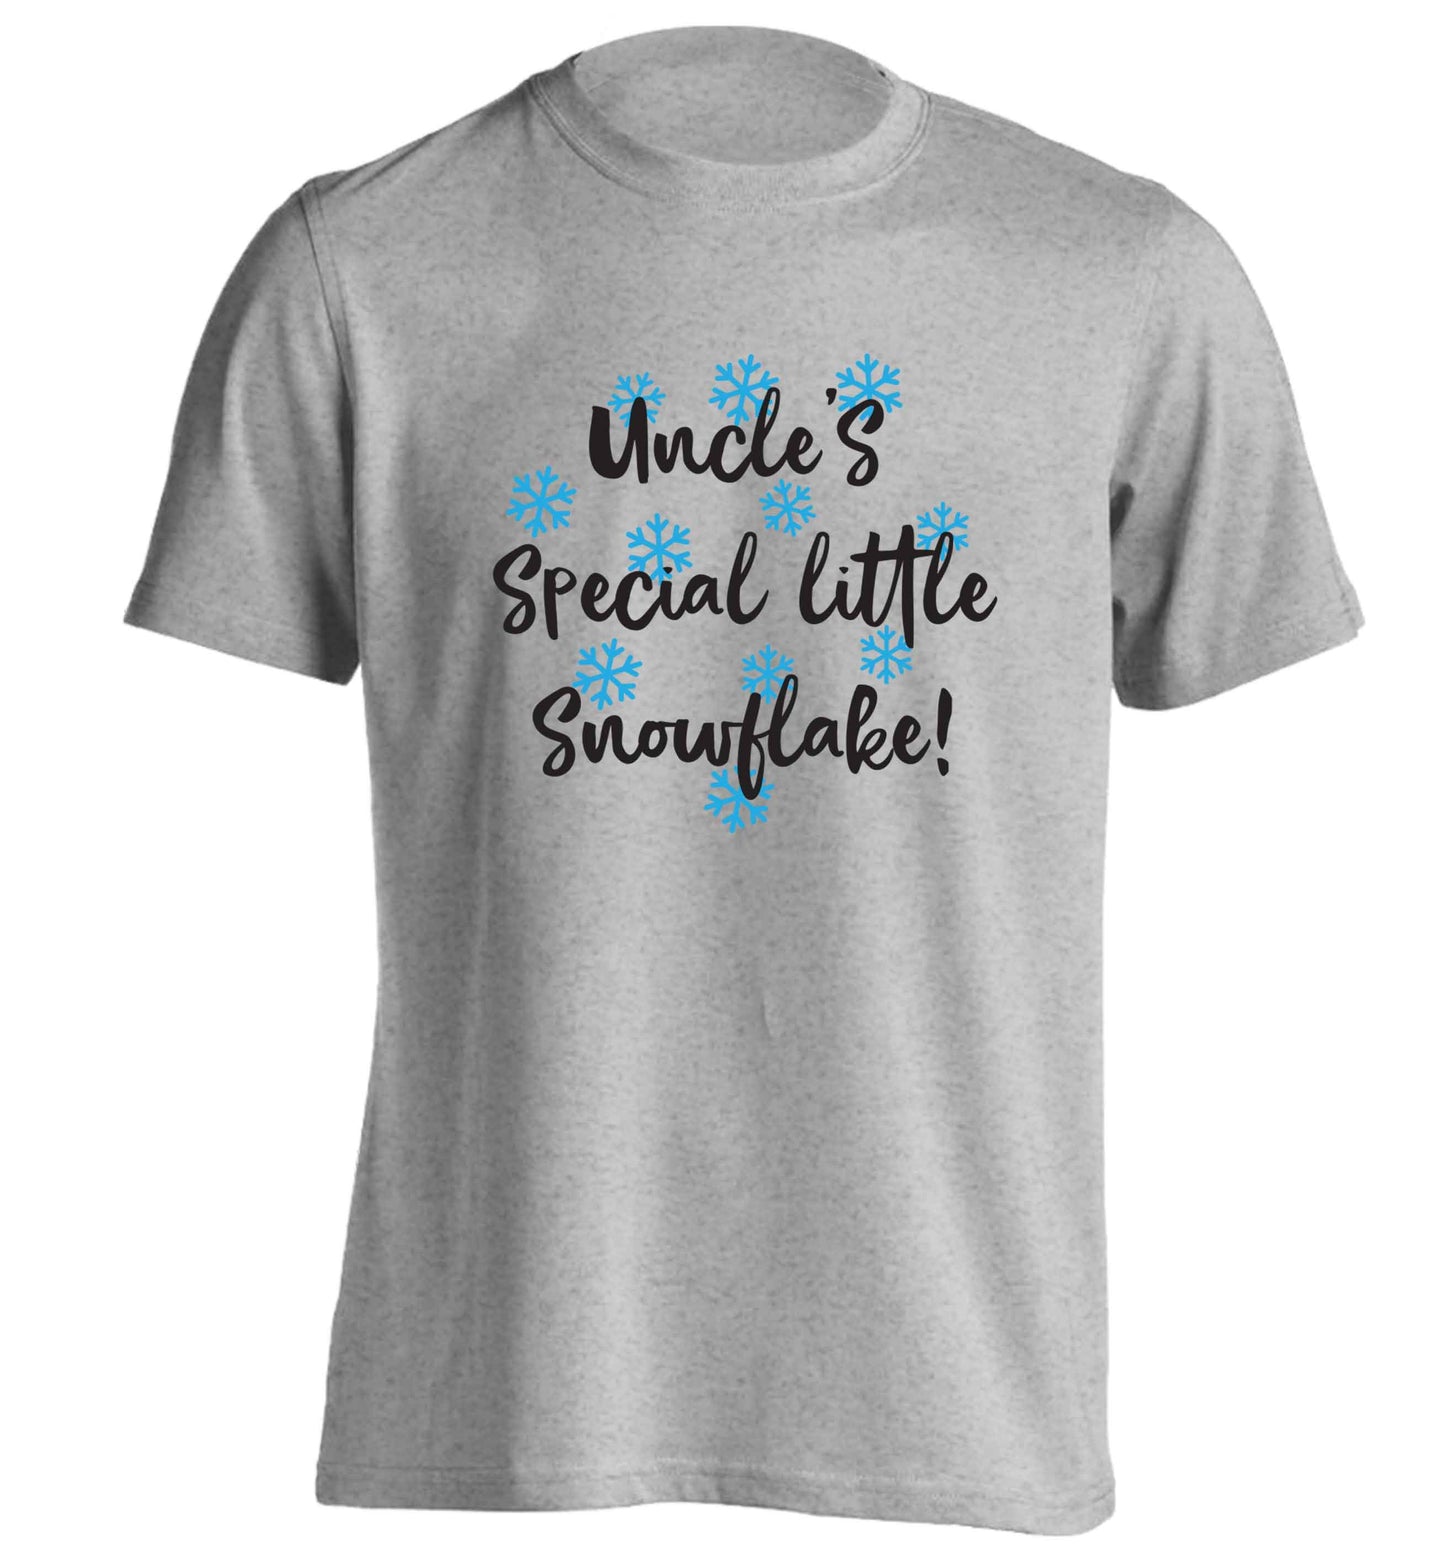 Uncle's special little snowflake adults unisex grey Tshirt 2XL